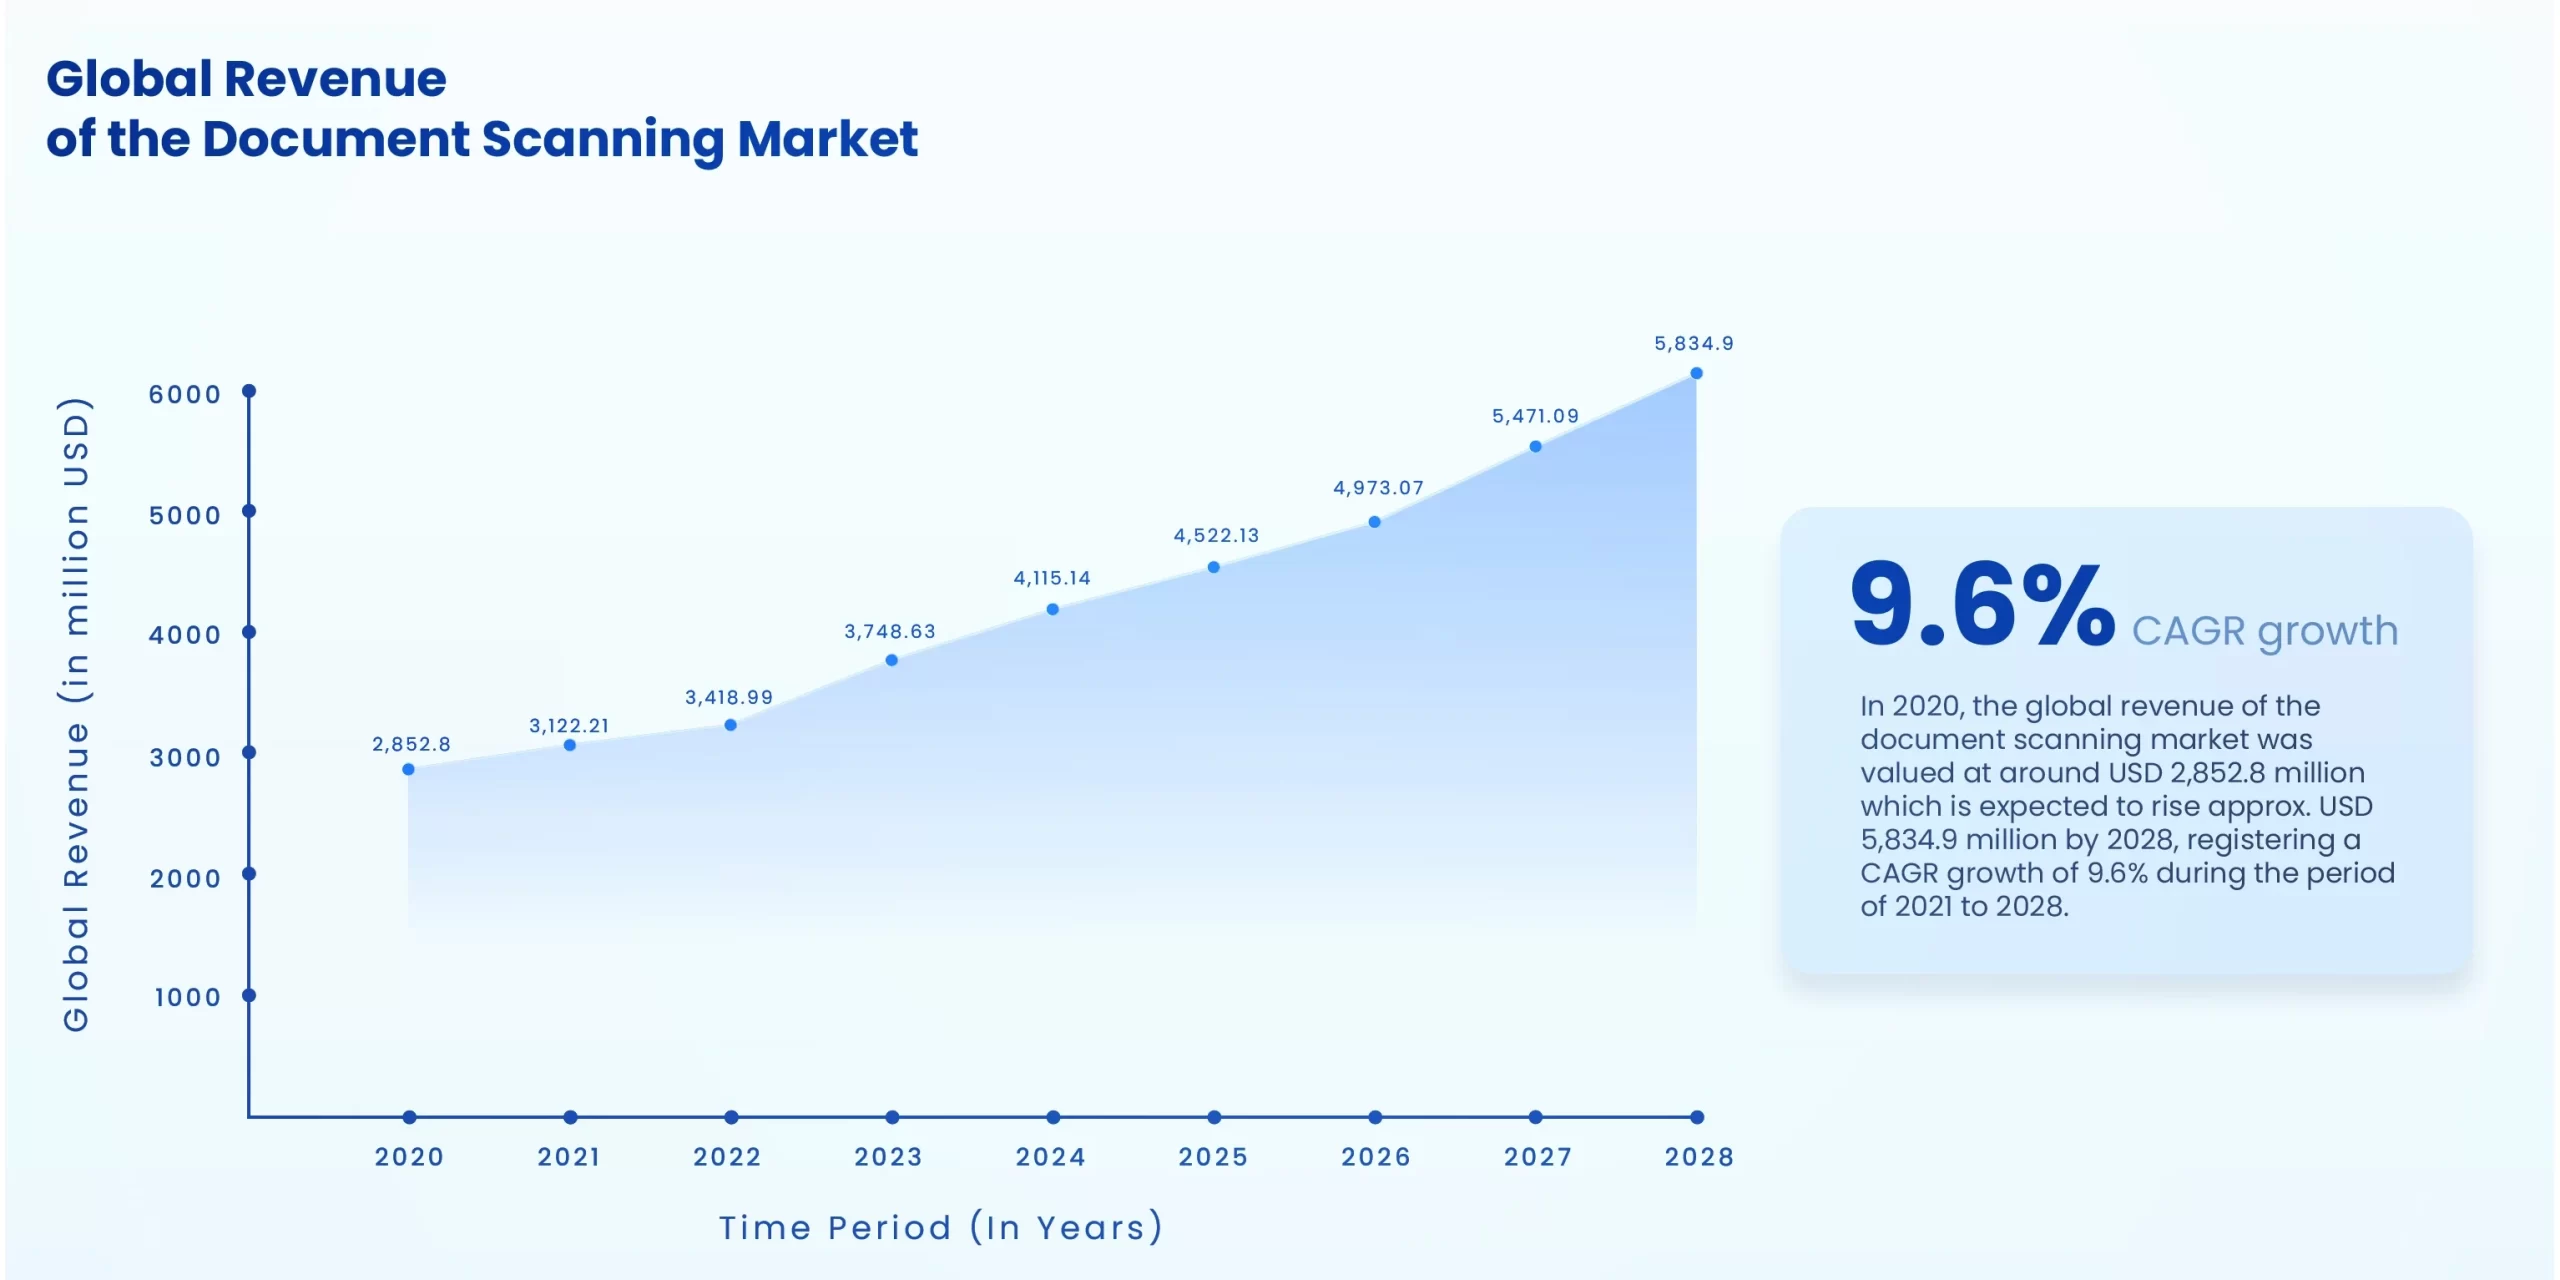 The Global Growth of the Document Scanning Market